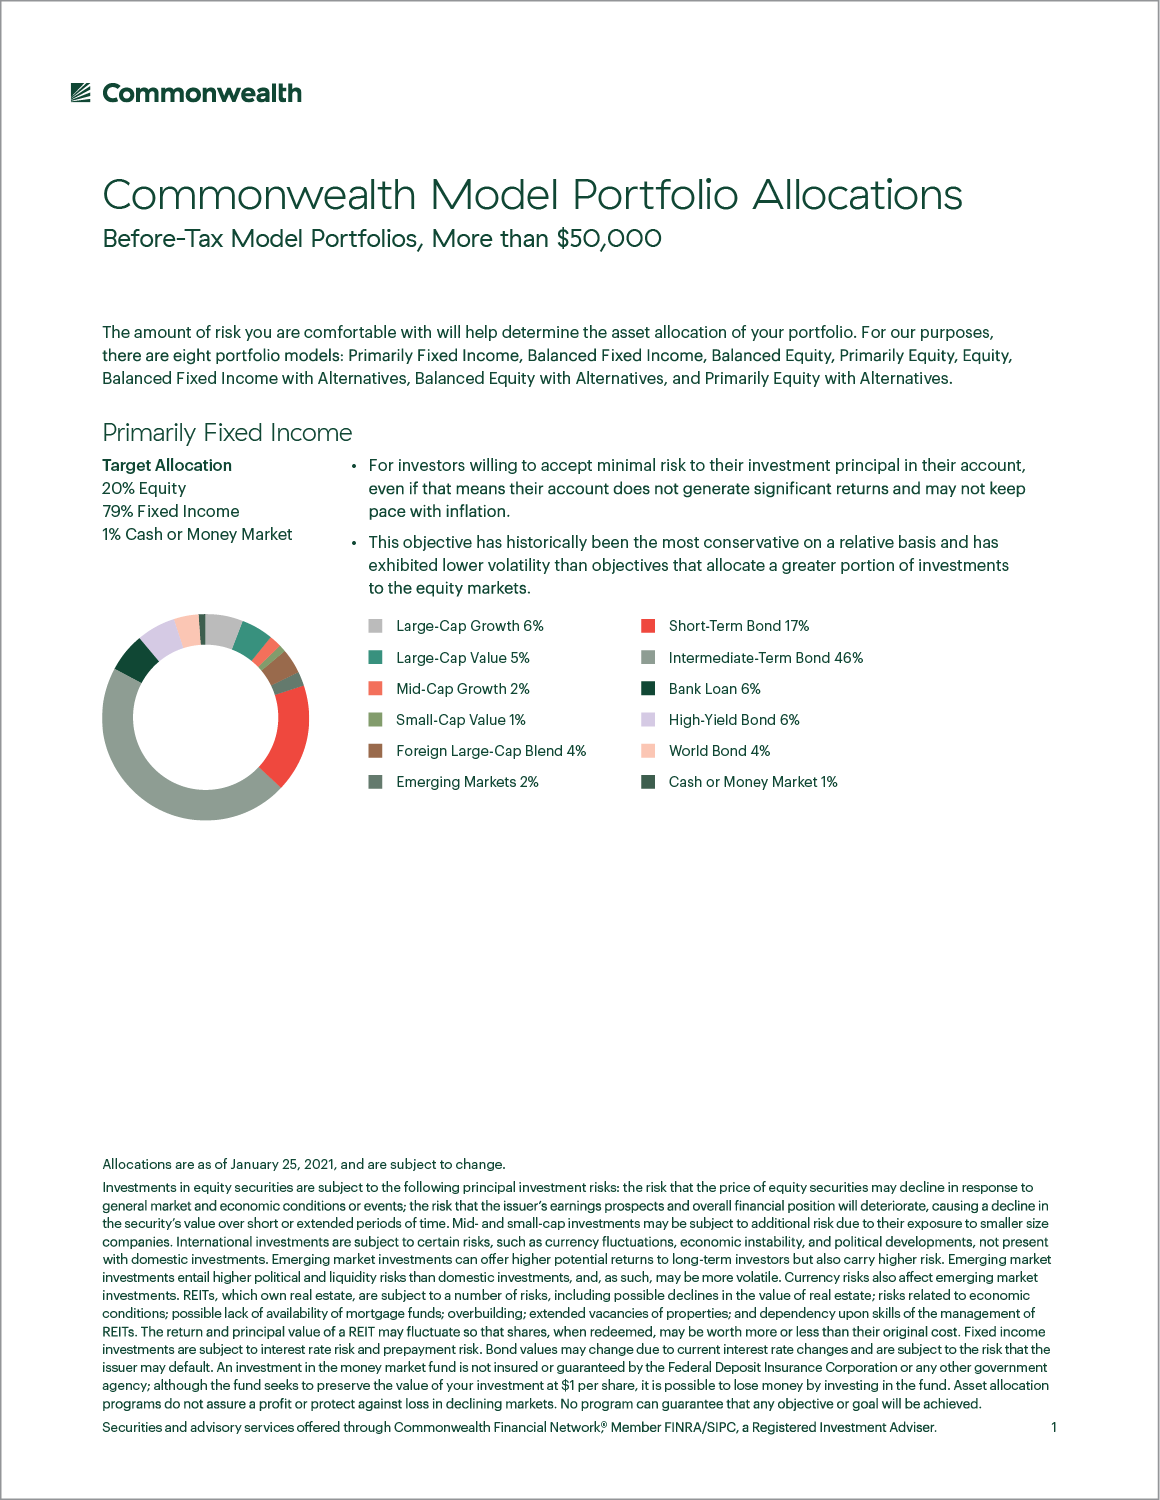 One of the pages from Commonwealth Model Portfolio Allocations piece